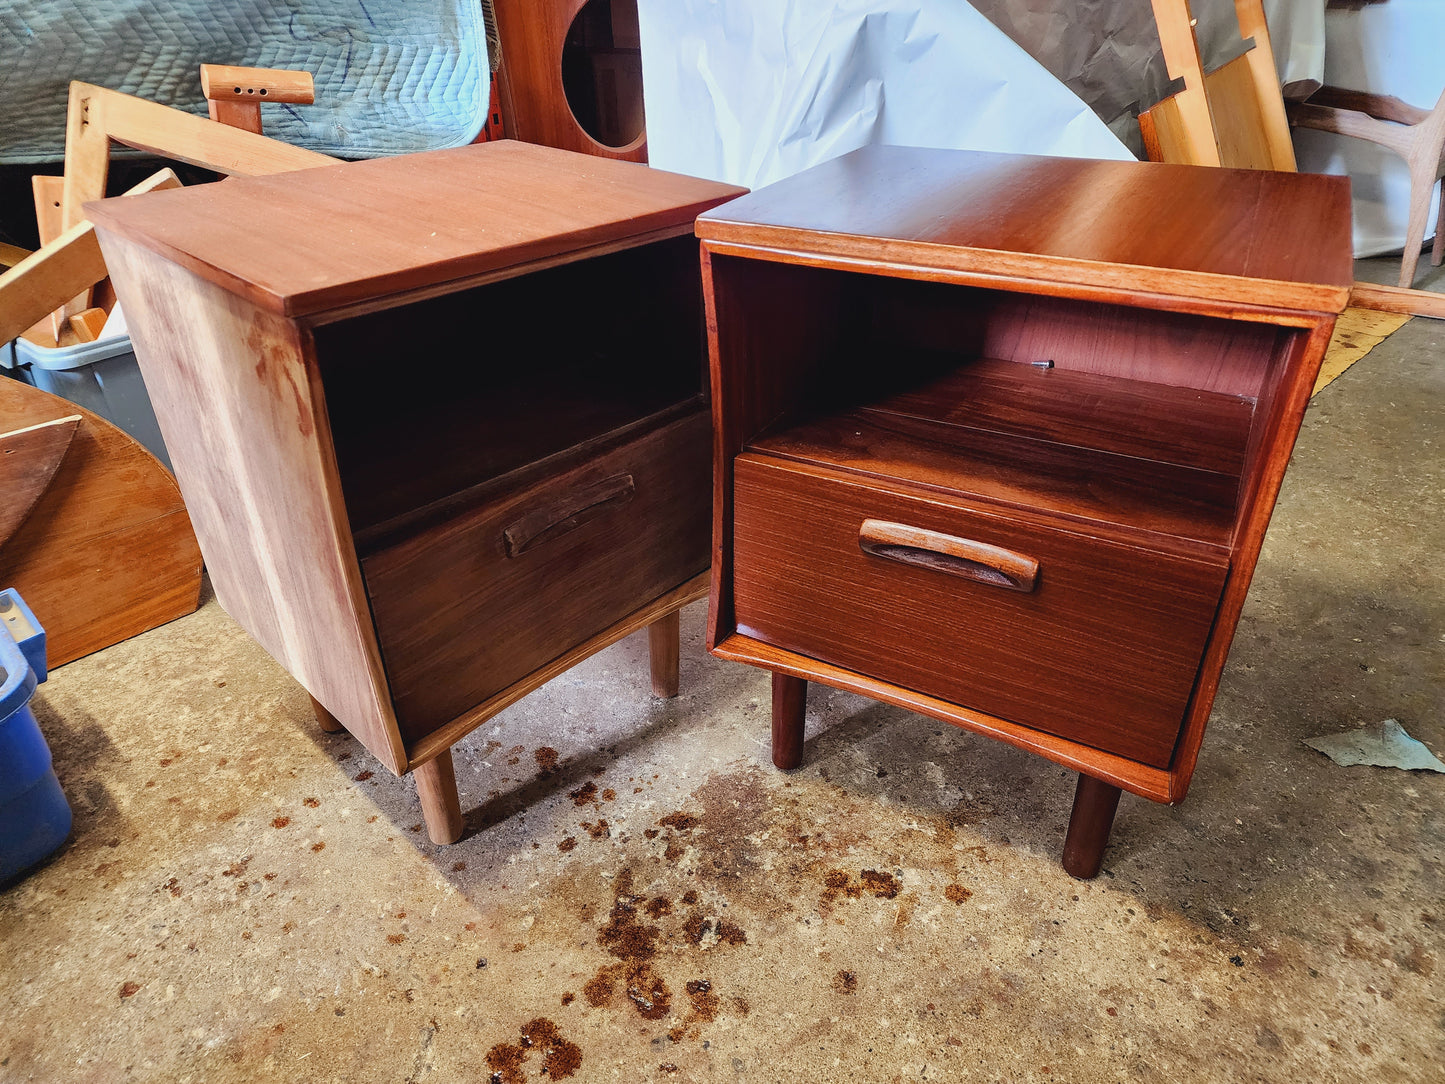 2 REFINISHED Mid Century Modern Solid Teak Afromosia Nightstands by Imperial